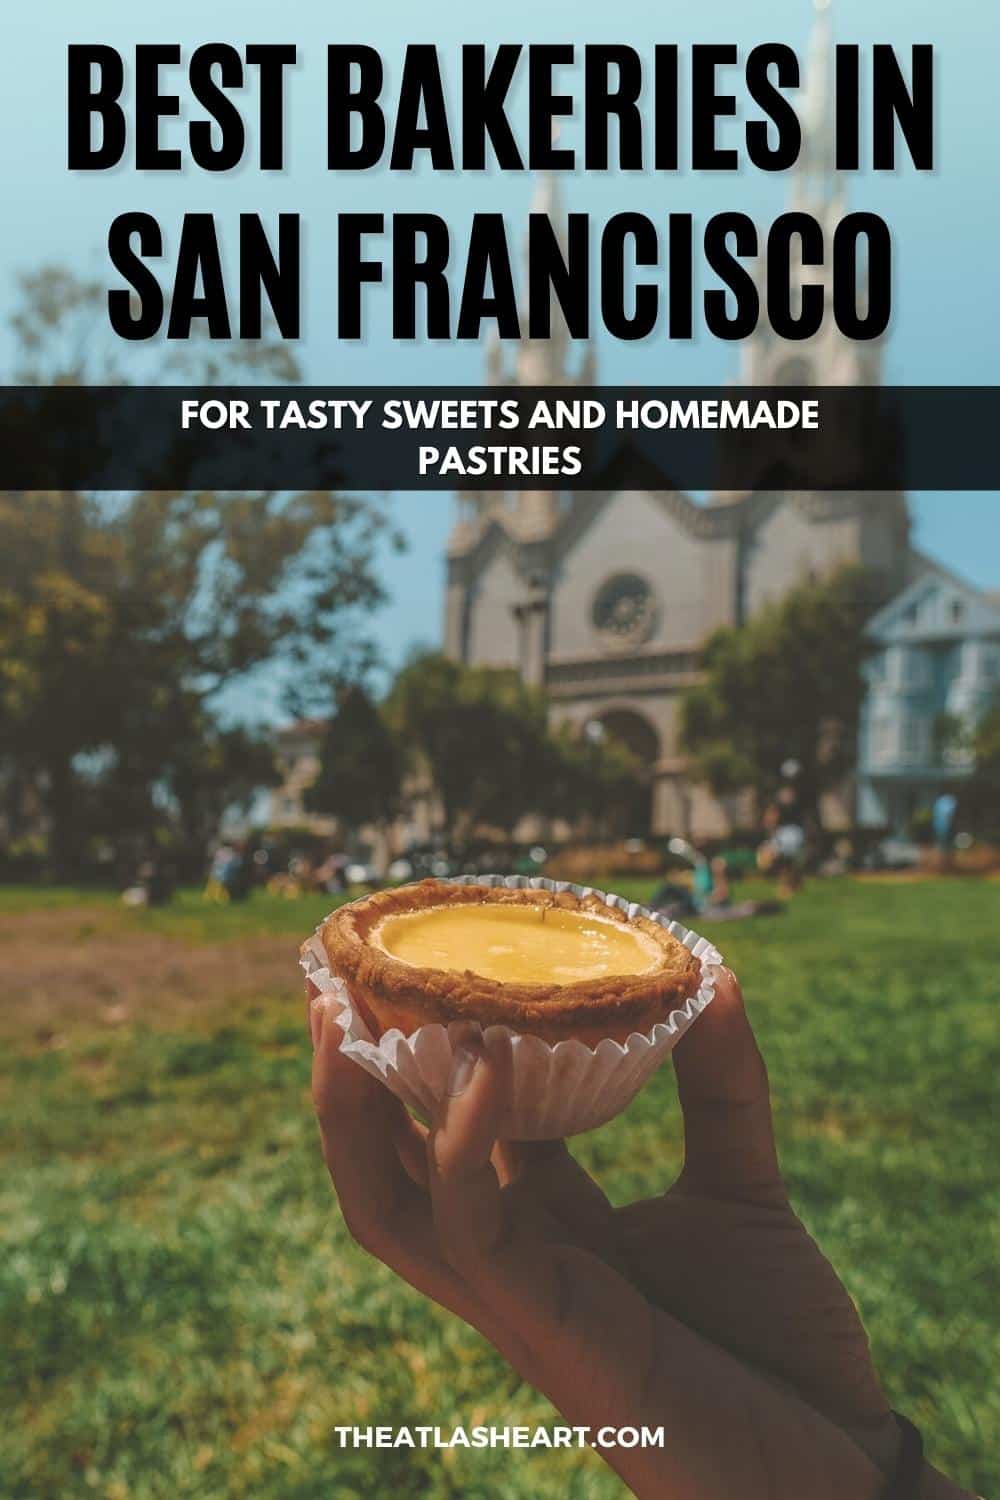 21 Best Bakeries in San Francisco for Tasty Sweets and Homemade Pastries